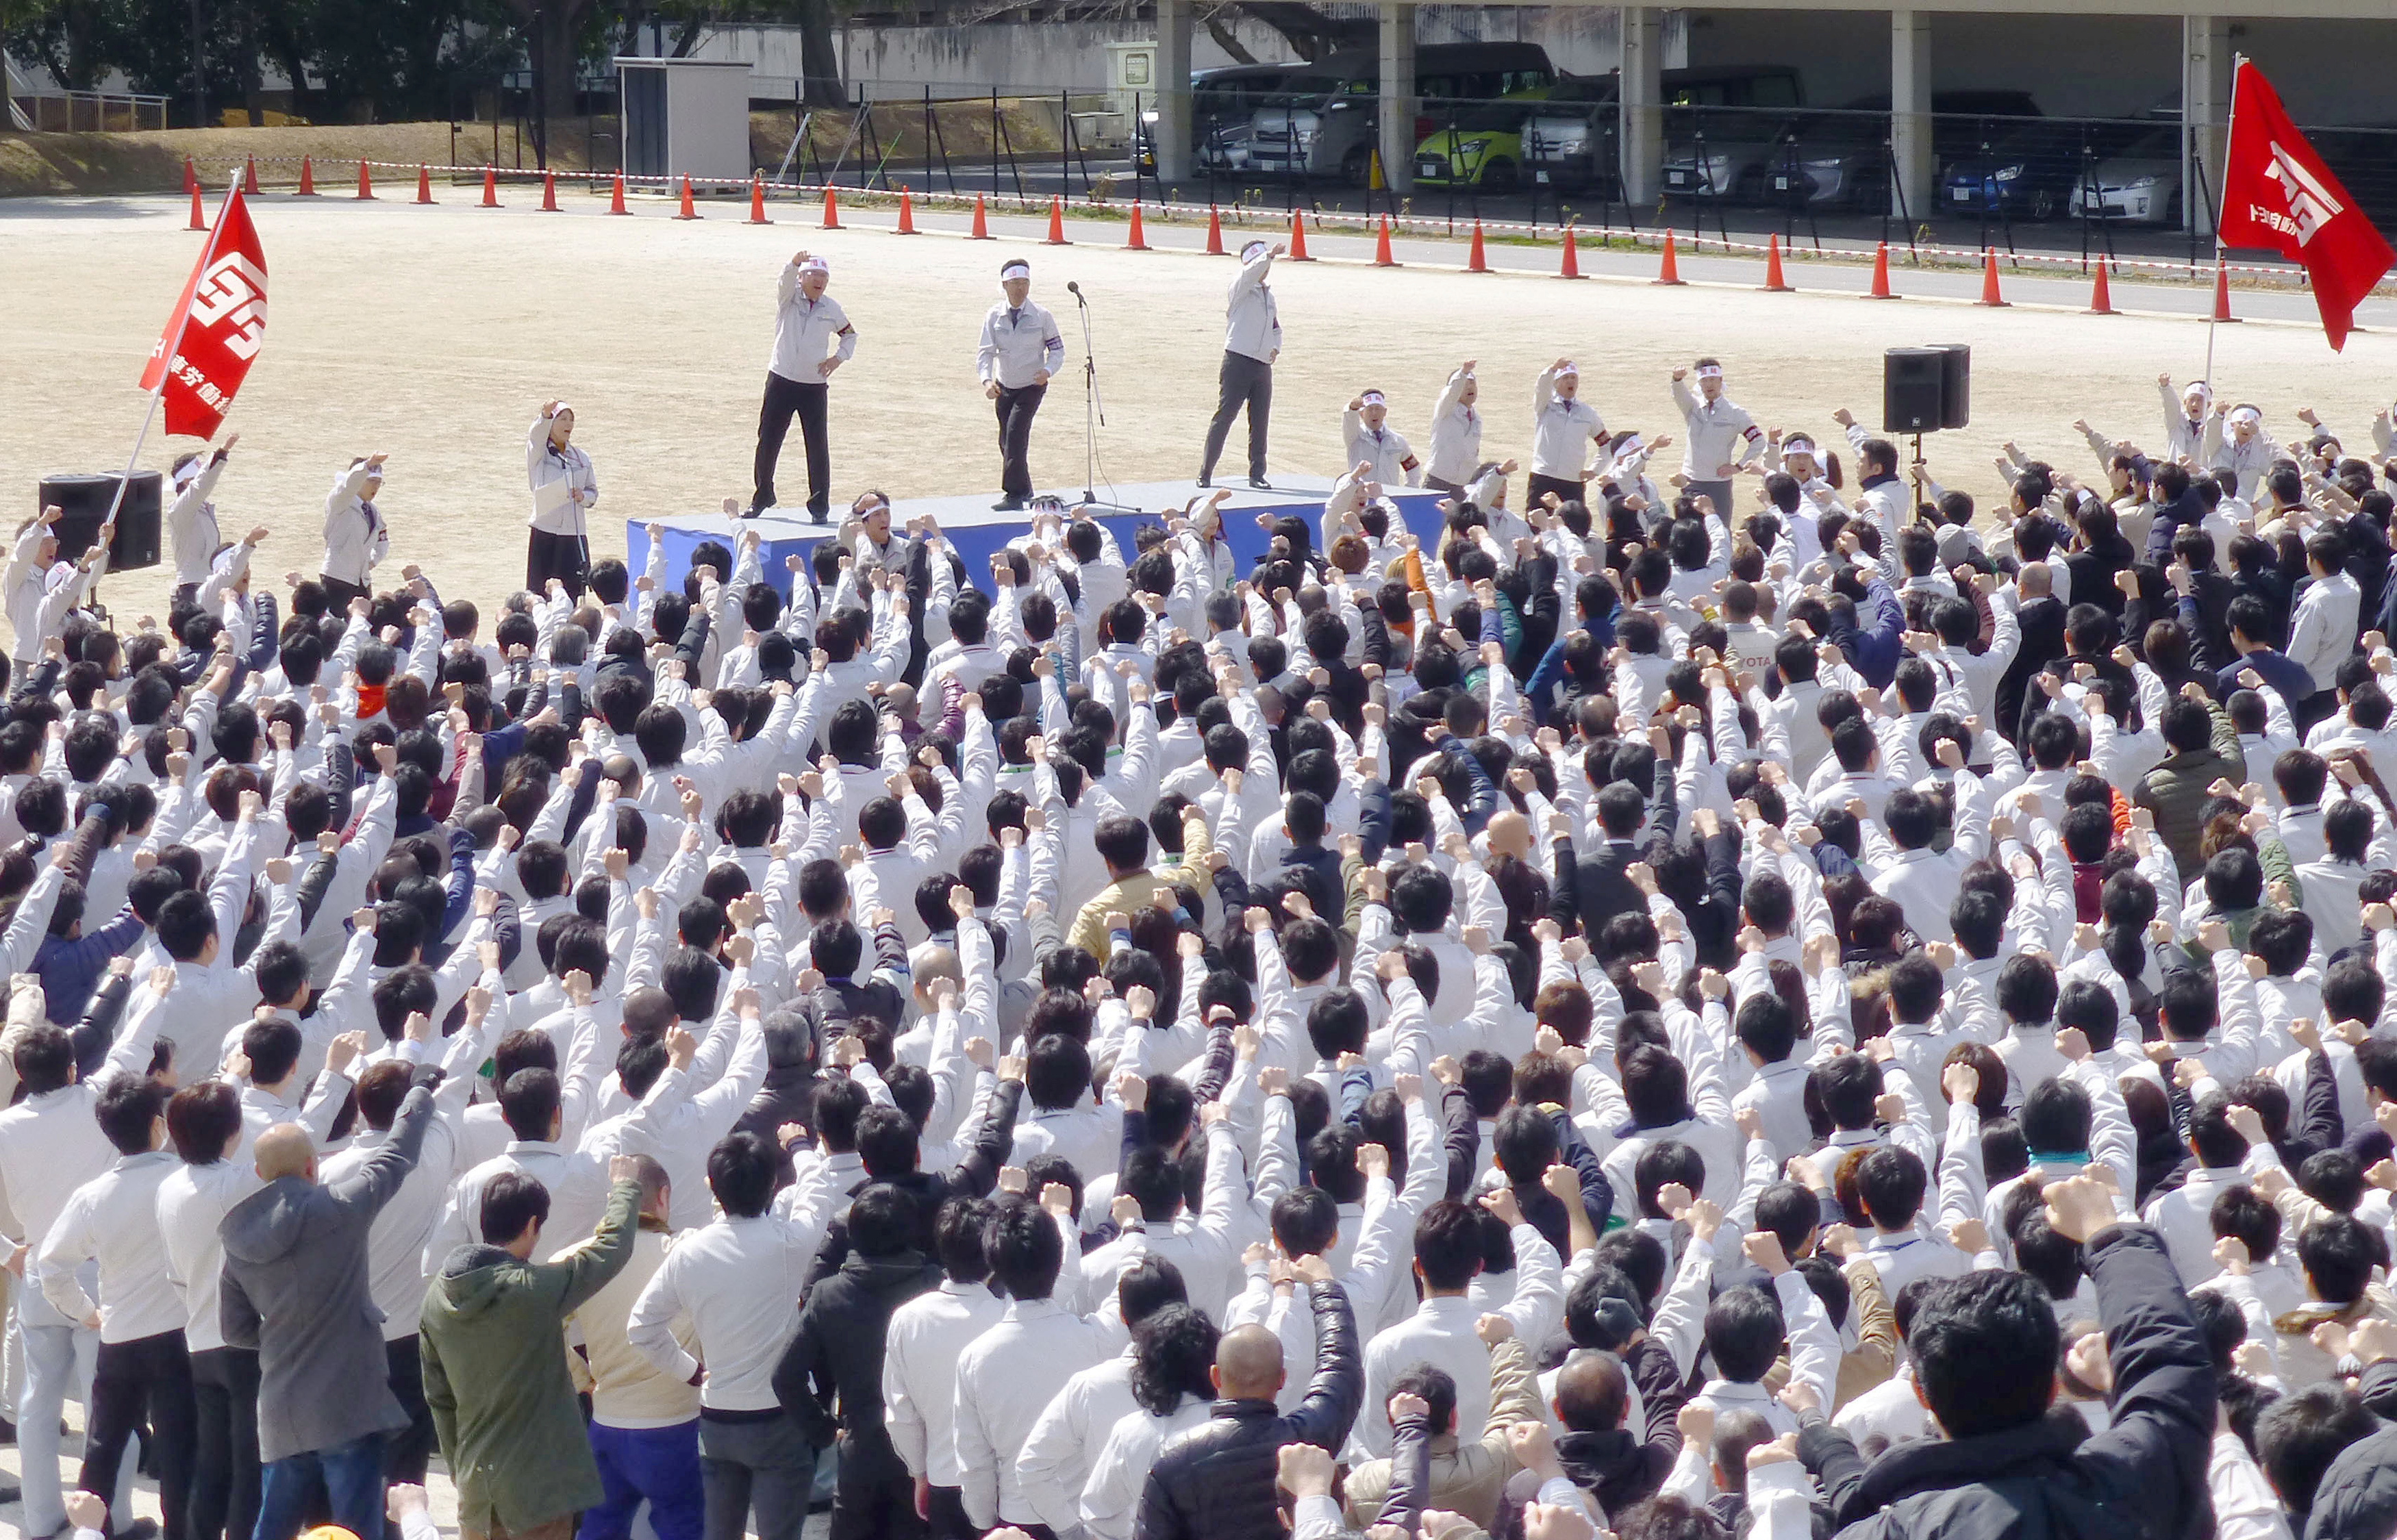 Members of the workers' union of Toyota Motor Corp. raise their fists as they shout slogans during a rally for the annual "shunto" wage negotiations at the company headquarters in Toyota